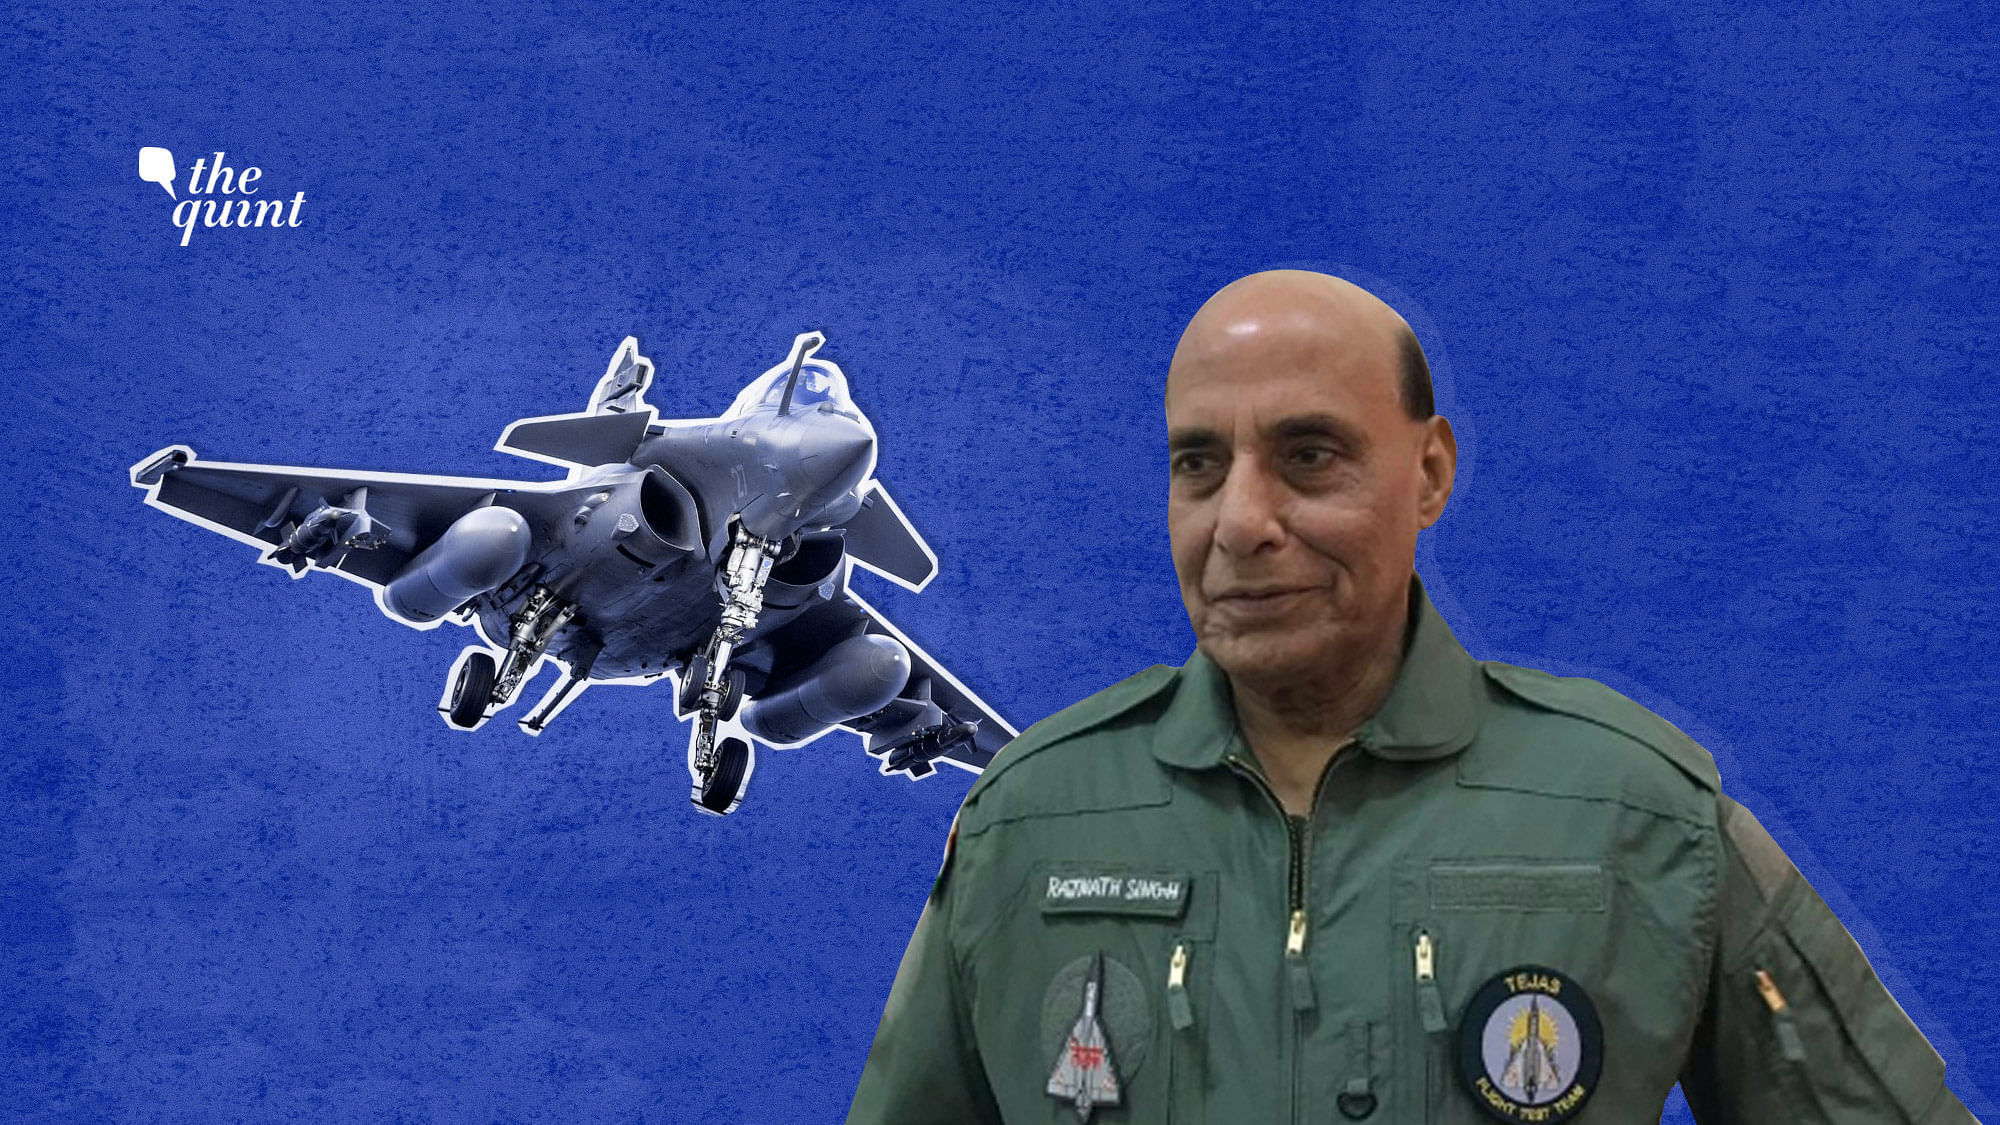 Image of Defence Minister Rajnath Singh, and a Rafale aircraft, used for representational purposes.